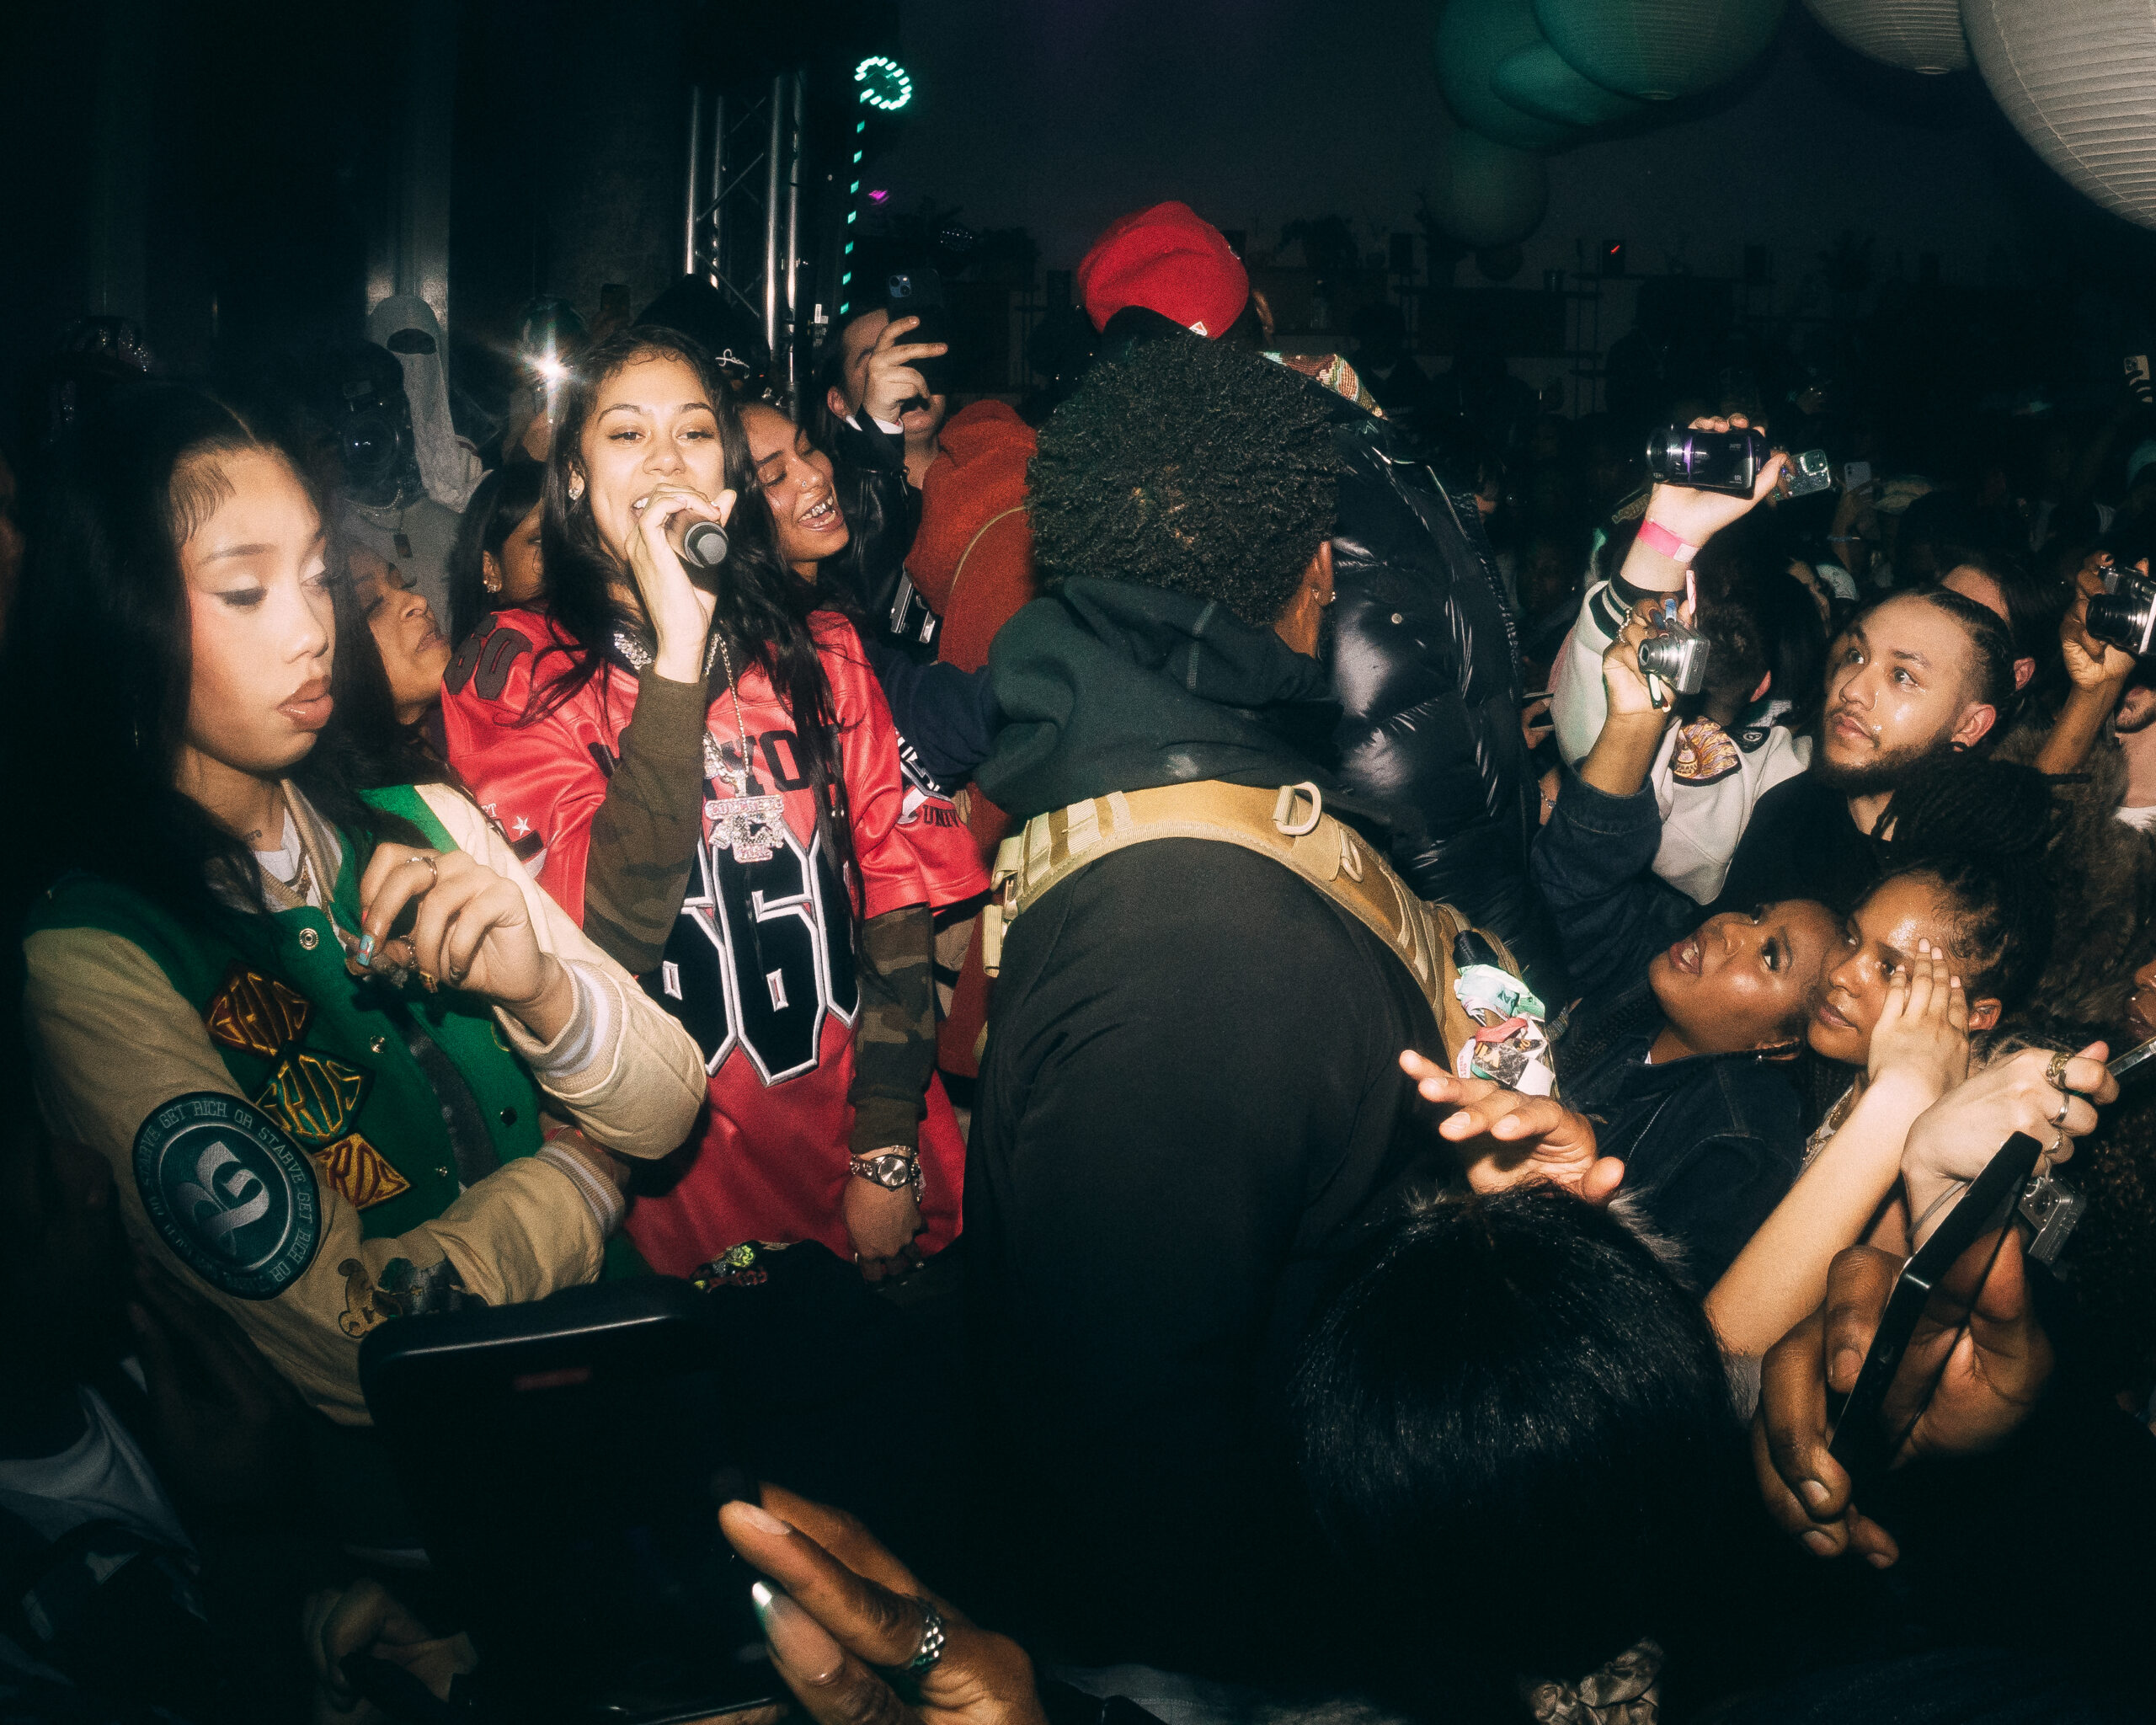 Mea Culpa Taps Rappers Karrahbooo And Anycia For Their NYFW Party